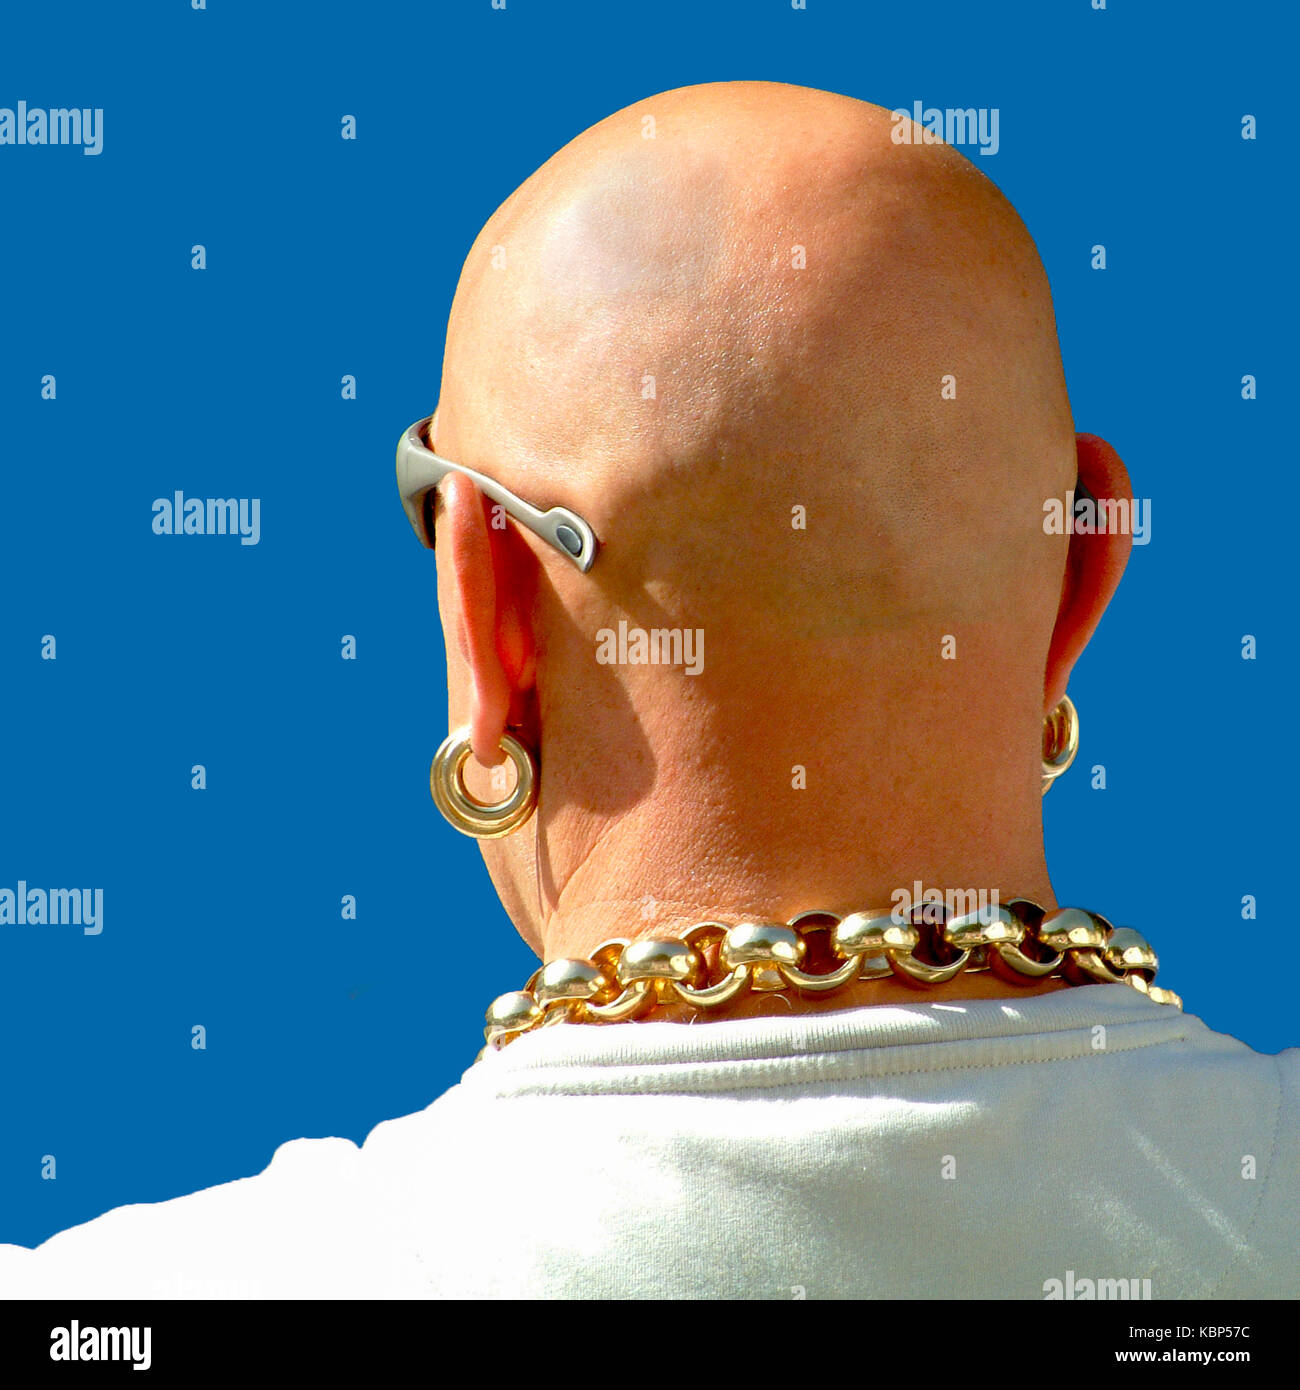 Head shot of shaven-headed man from behind wearing sunglasses , heavy gold earrings and a very heavy gold chain against a clear blue sky. Stock Photo